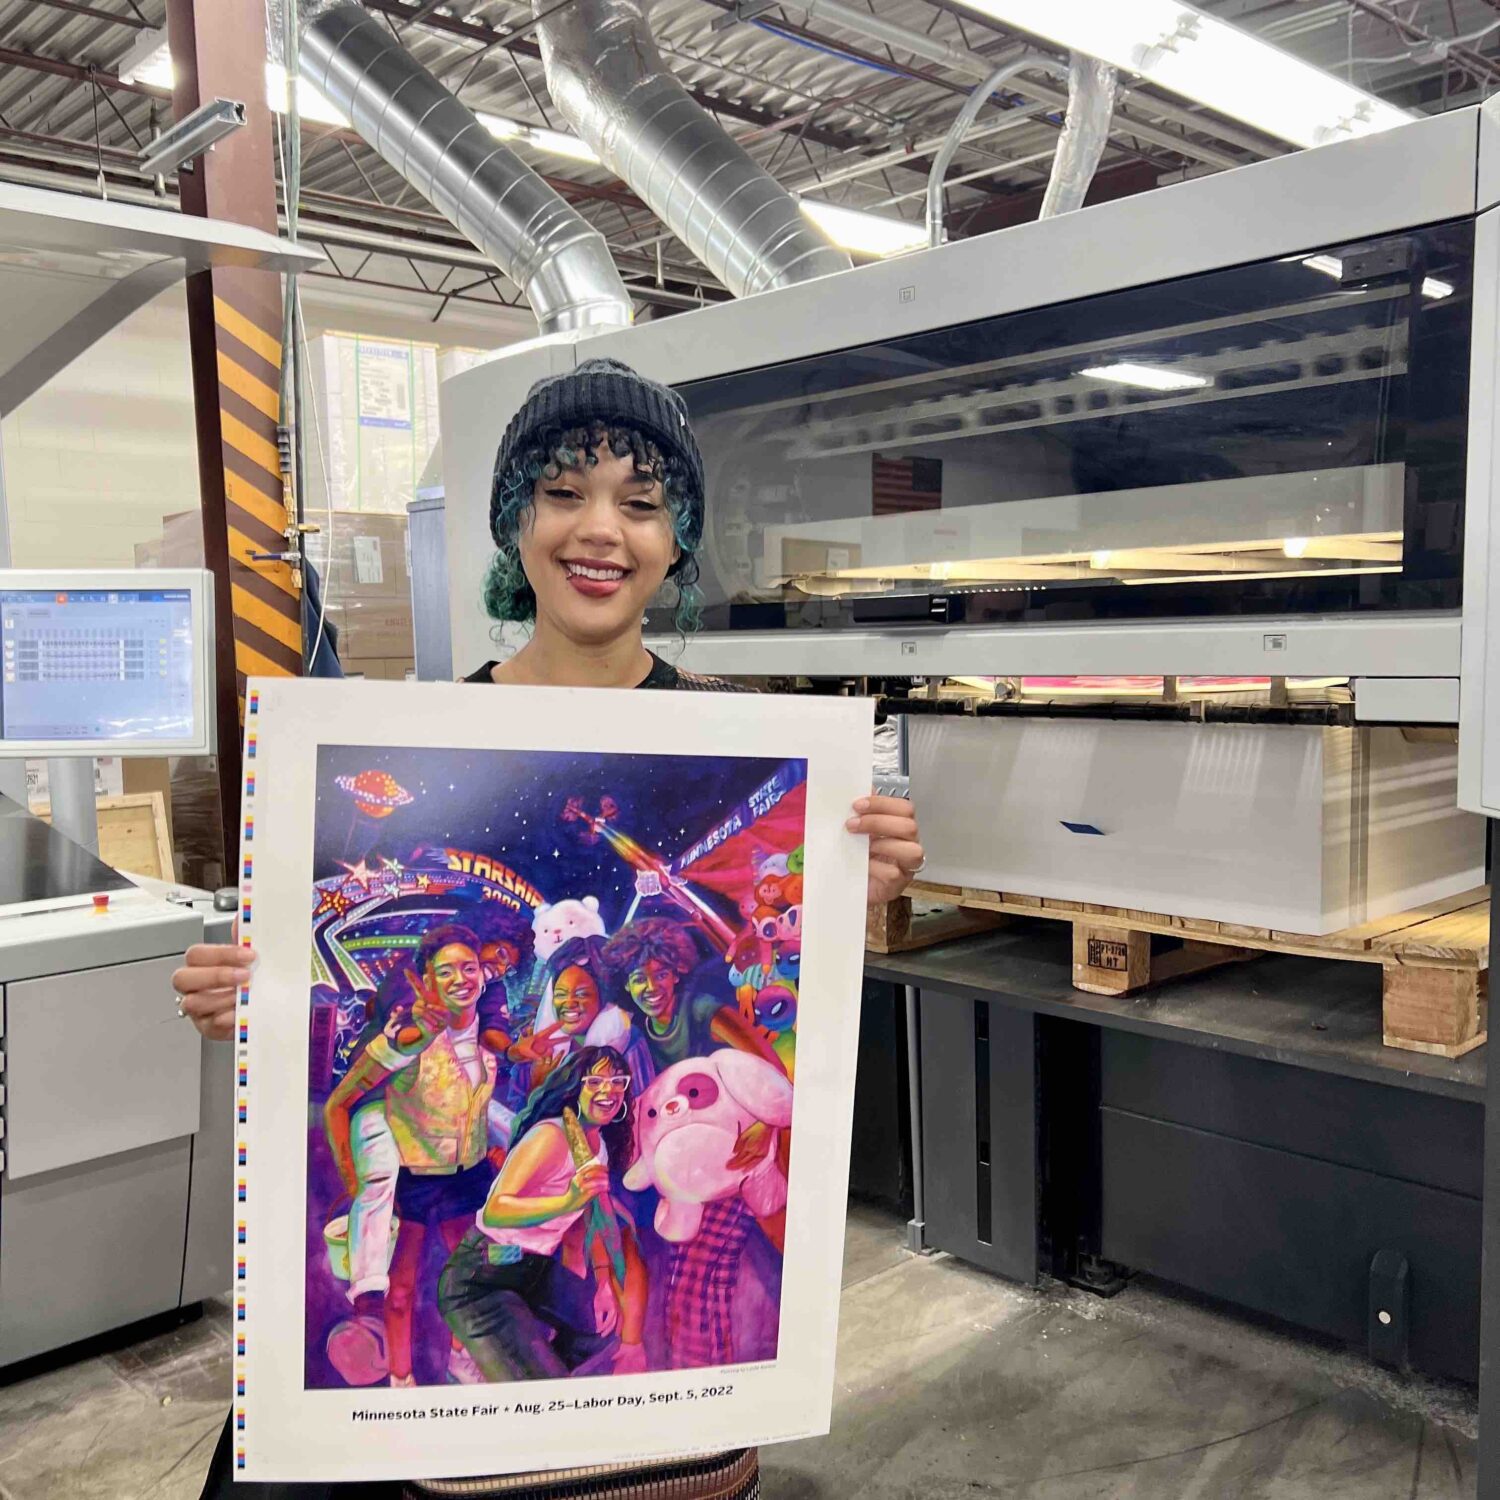 Leslie Barlow with a newly printed poster of the 2022 Minnesota State Fair Official Commemorative Art